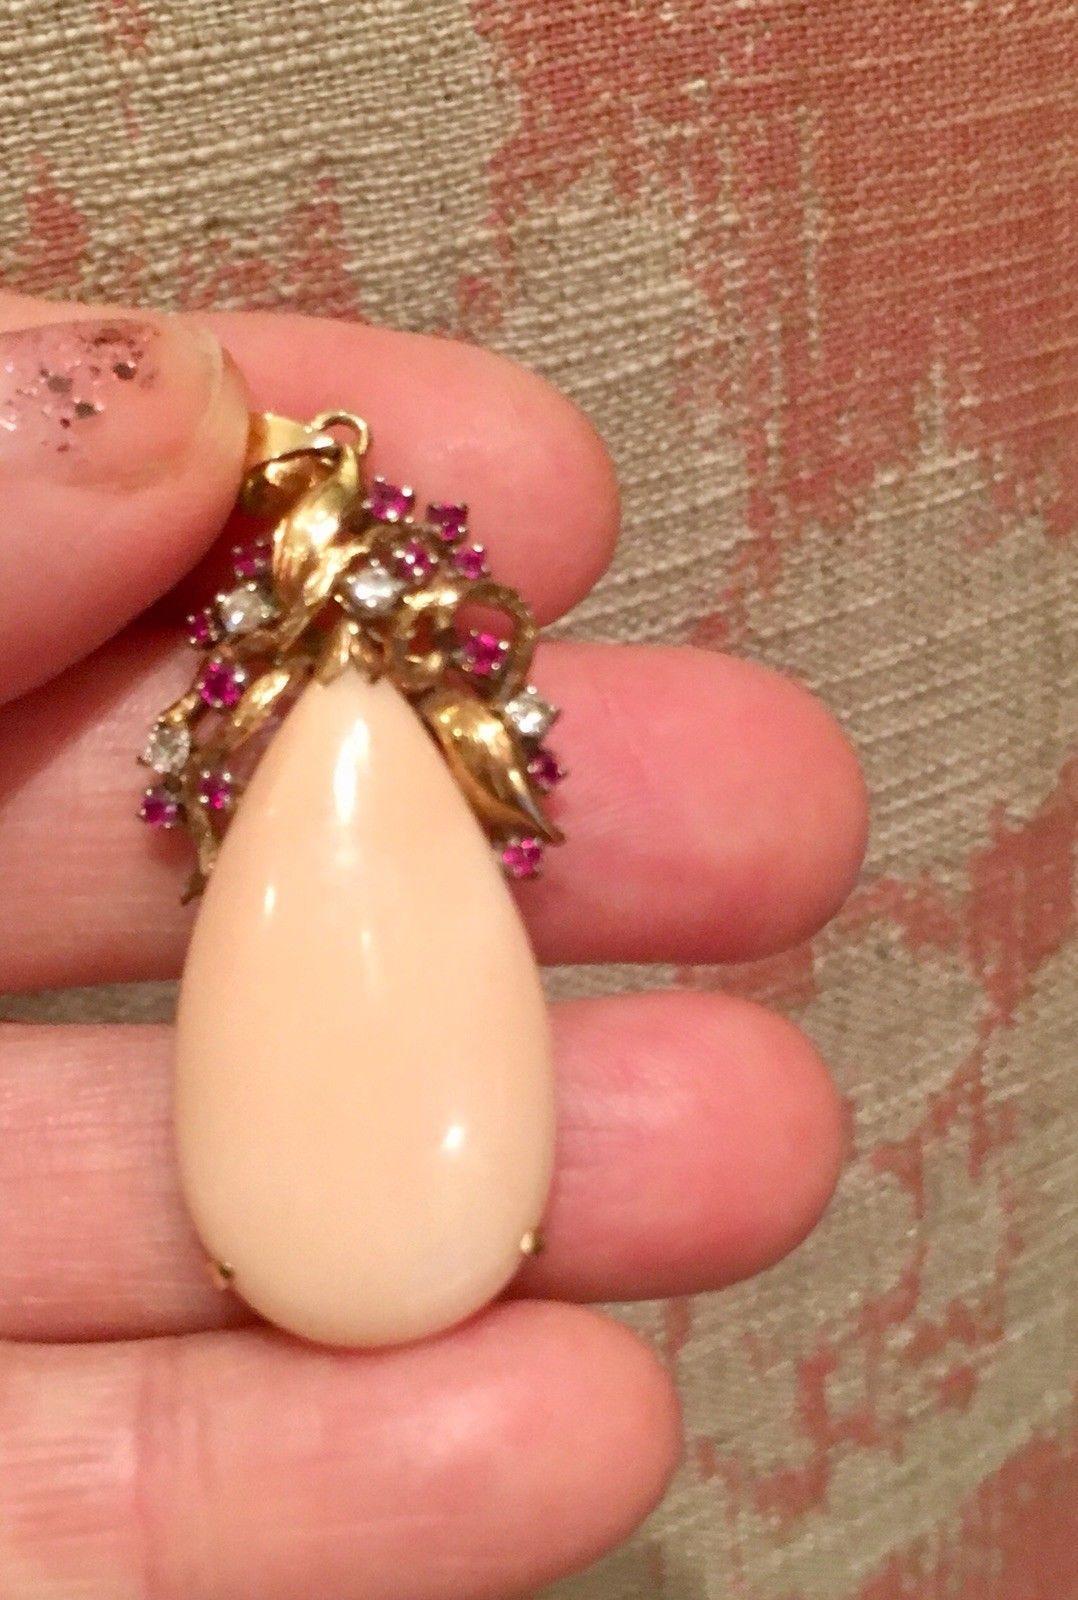 Stunning pear shaped angel skin coral cabochon is sent in a 14k gold surround with a pendant loop at the top and striking ruby and diamond gemstones. What a gorgeous soft colored pendant with beautiful pinks and reds! 

The red ruby faceted